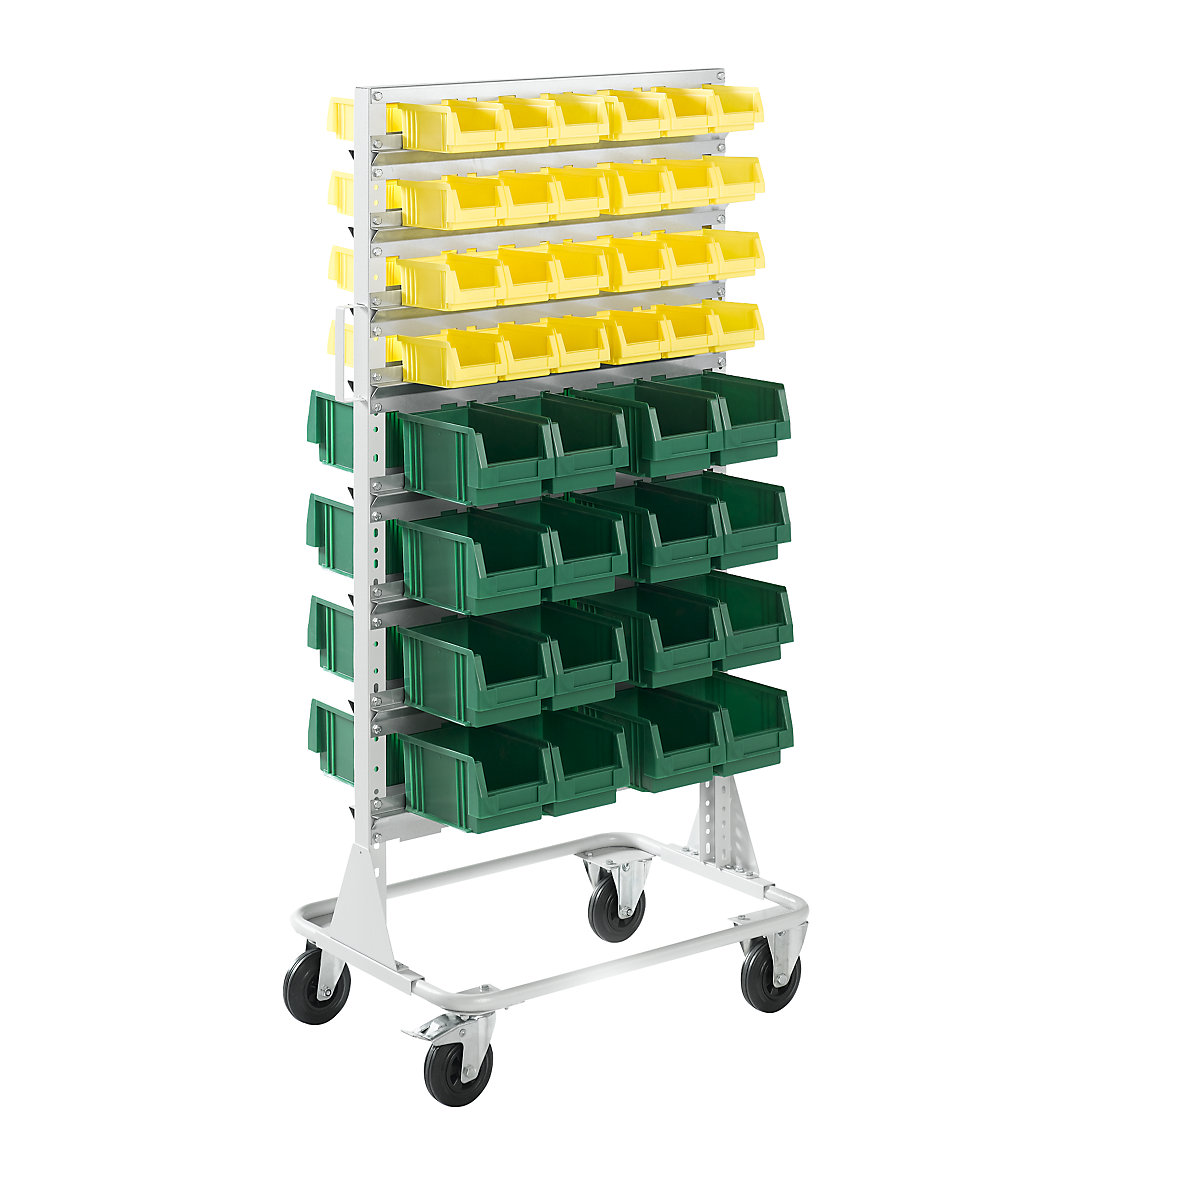 Mobile rack, height 1588 mm, mobile rack with 80 open fronted storage bins, light grey-5